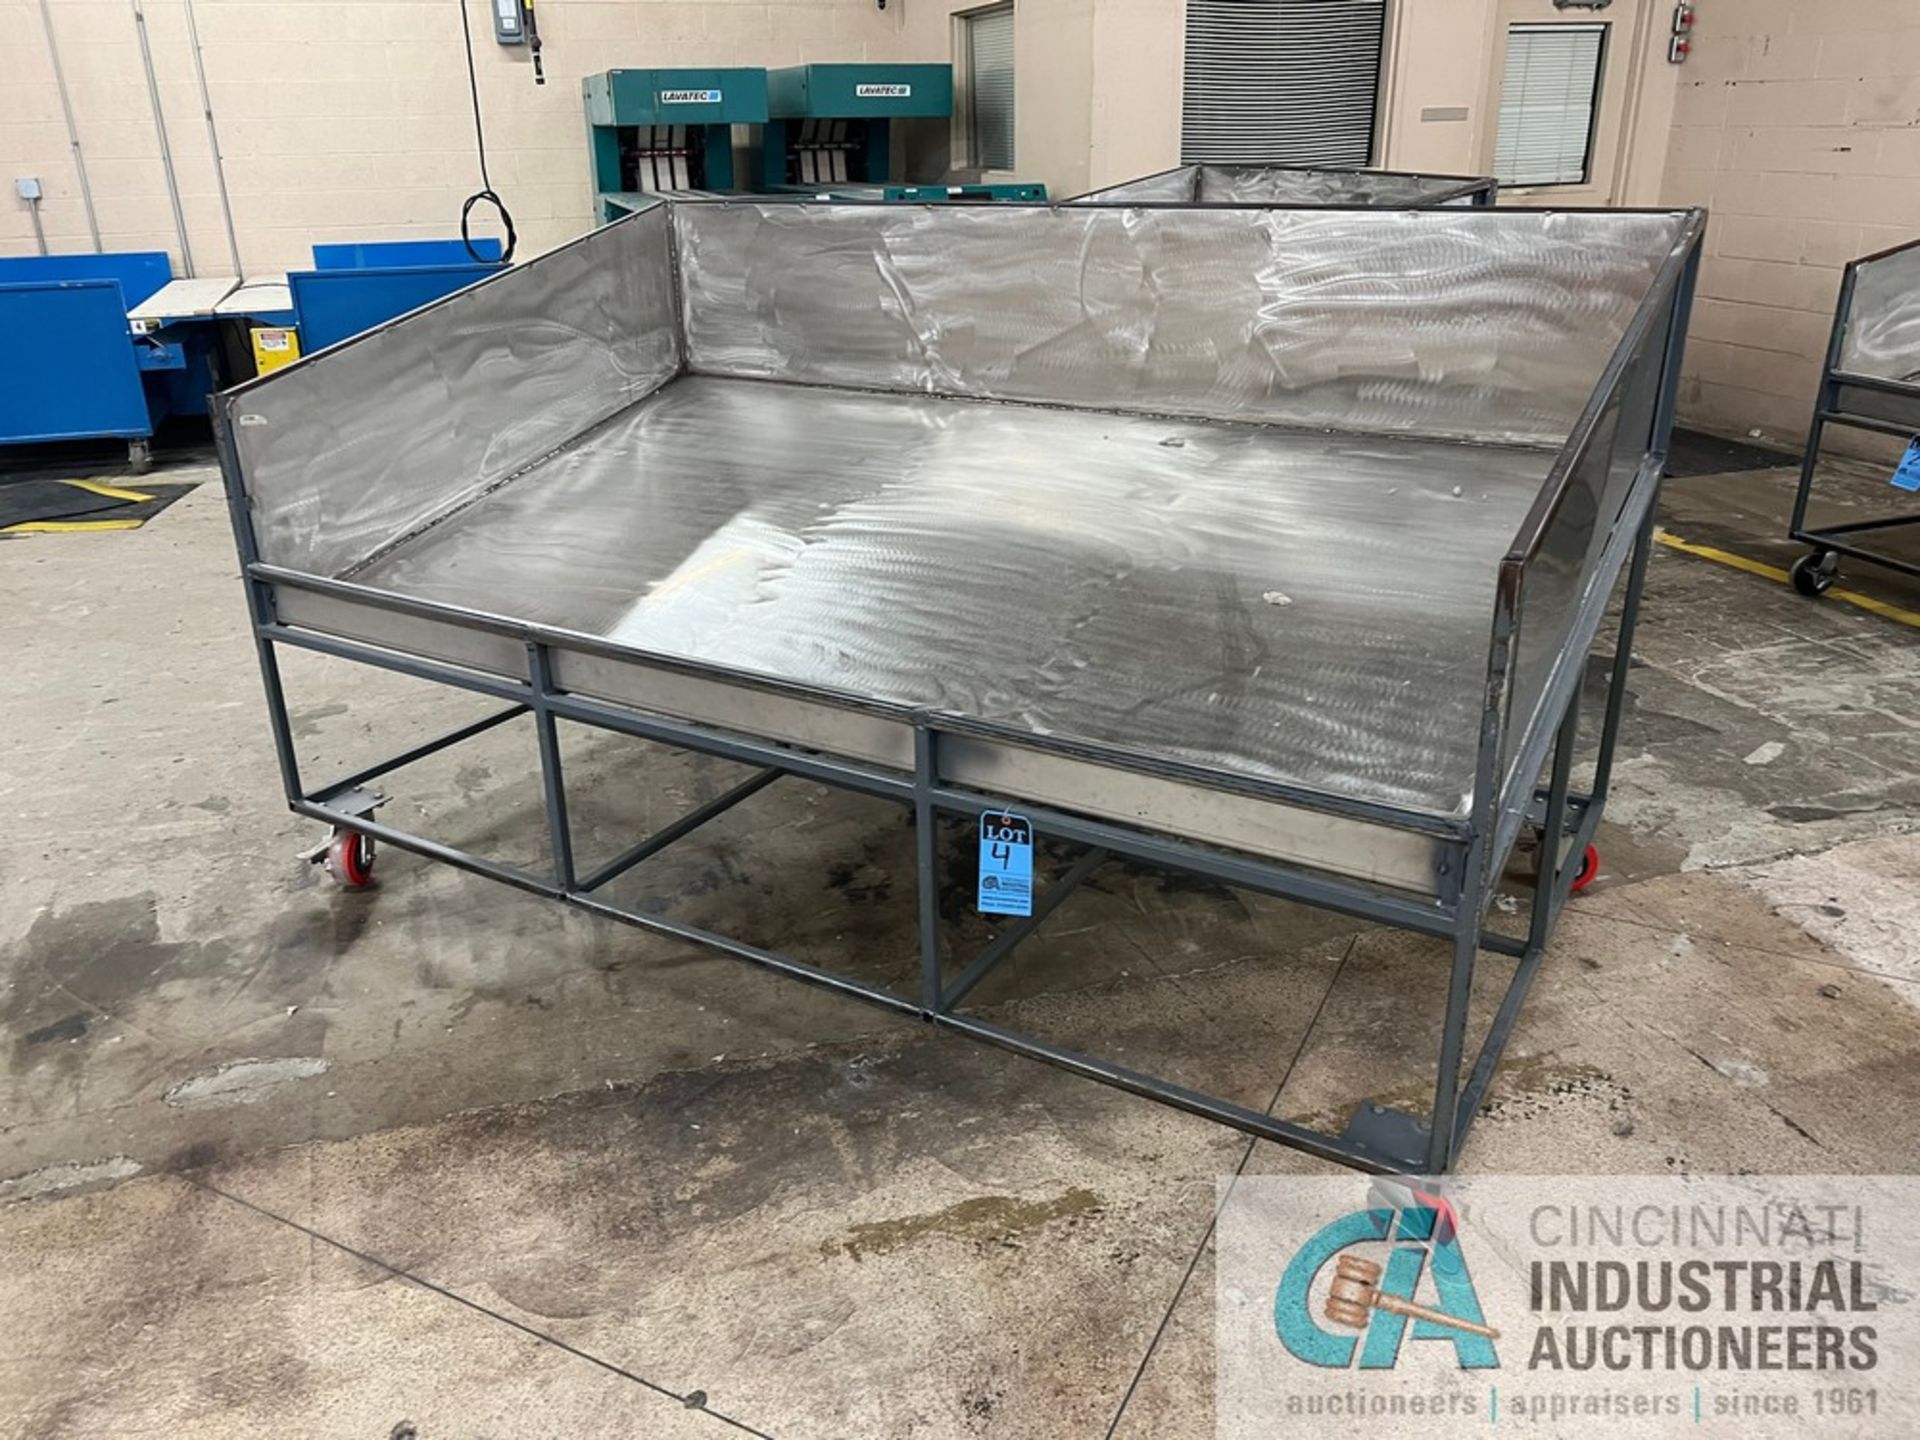 52" X 93" LONG X 17" HIGH STAINLESS STEEL TUB STEEL FRAME SORTING CART, 54" OVERALL HEIGHT